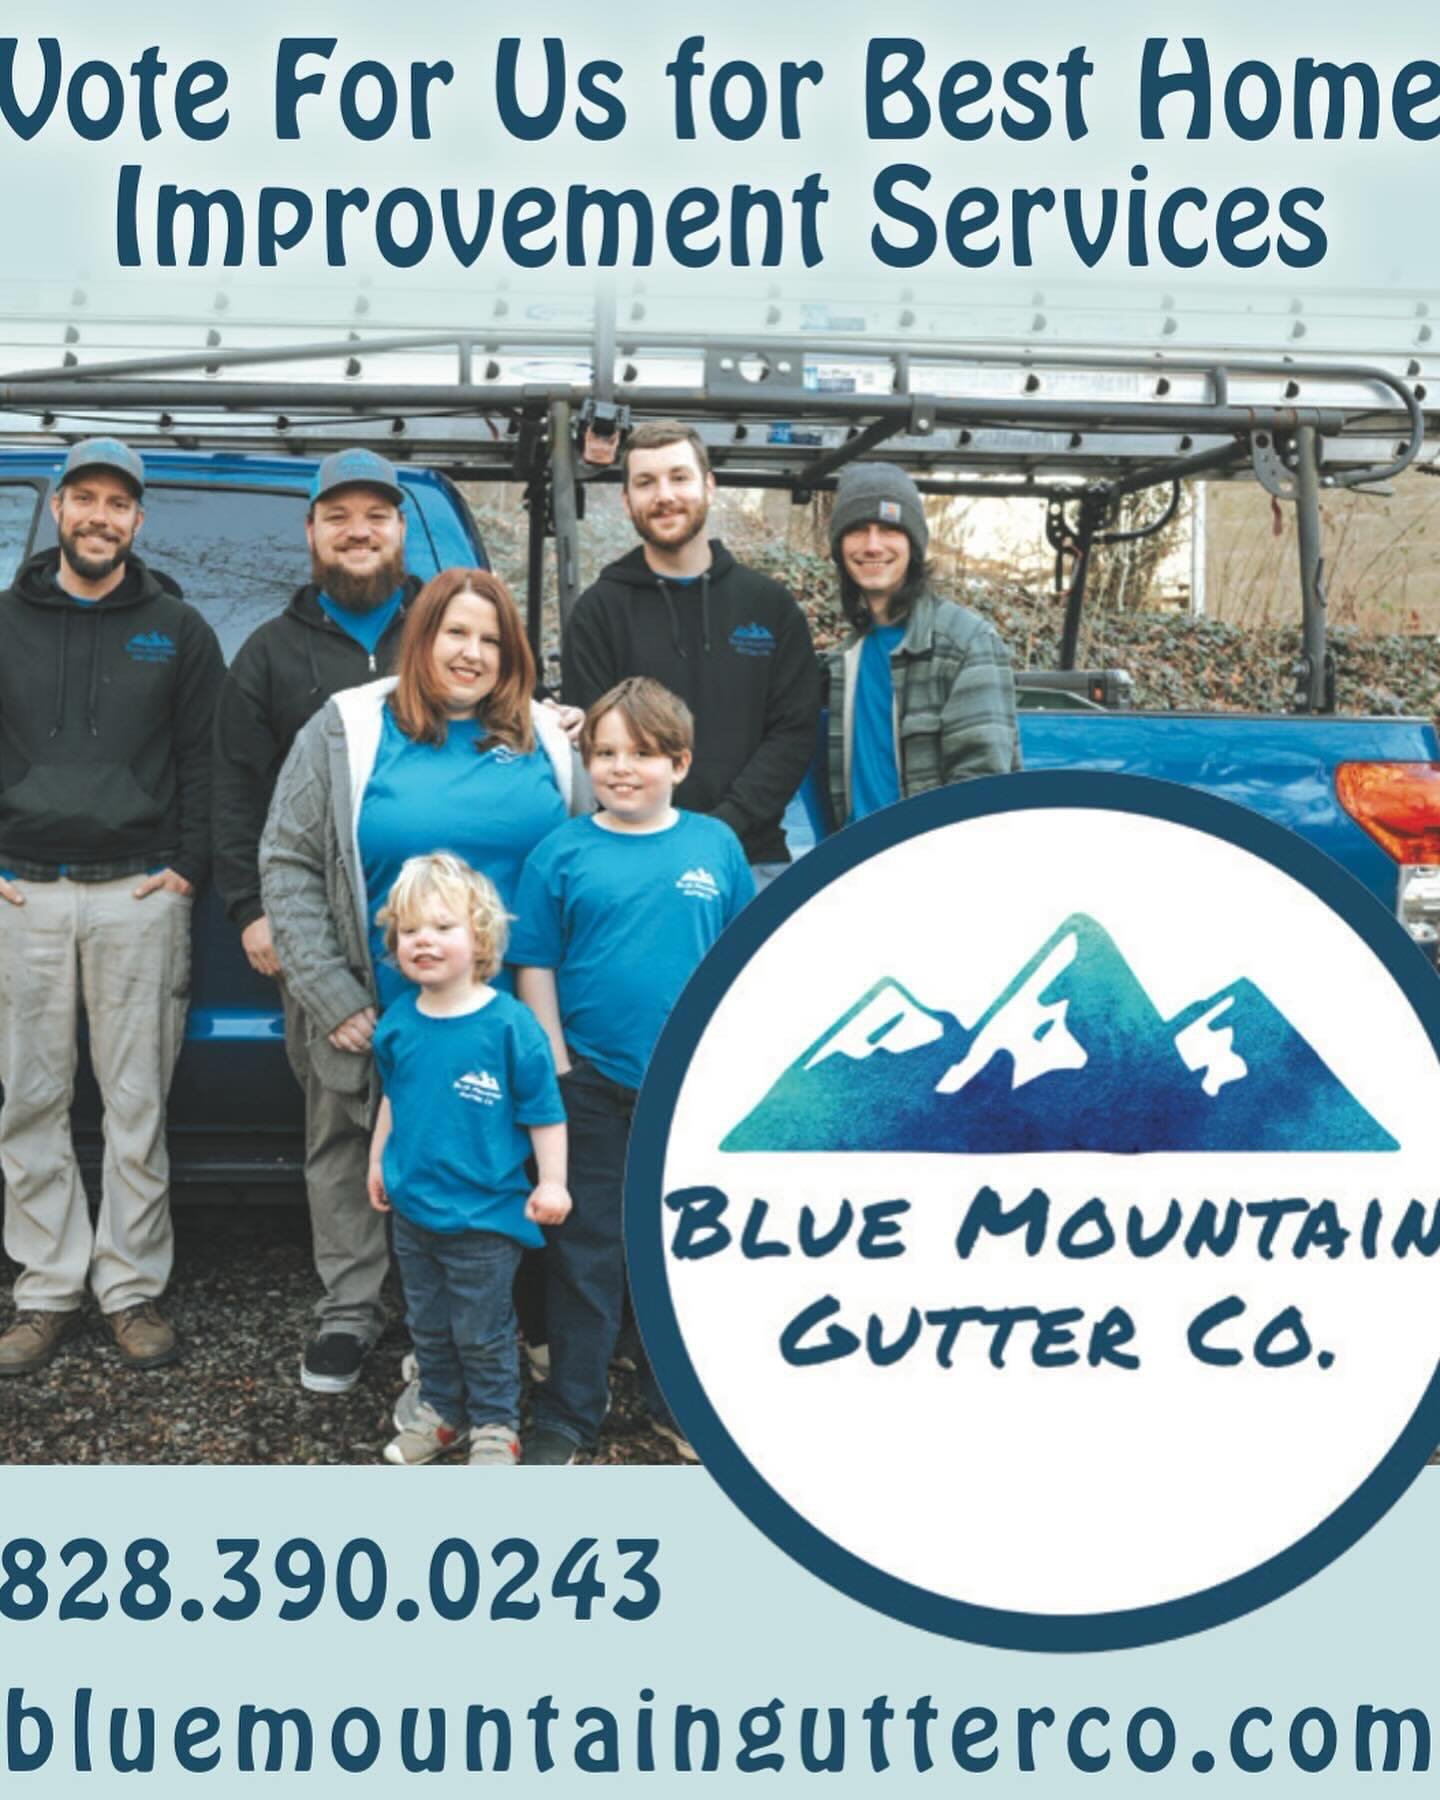 Today is the final day of voting for the Best of WNC! Cast your ballot now!  Vote for us for best Home Improvement Services!
 
https://ballot.bestofwnc.com/index.php/627278

#BestofWNC2024 #best #vote #homeimprovement #gutters #gutterinstallation #ex